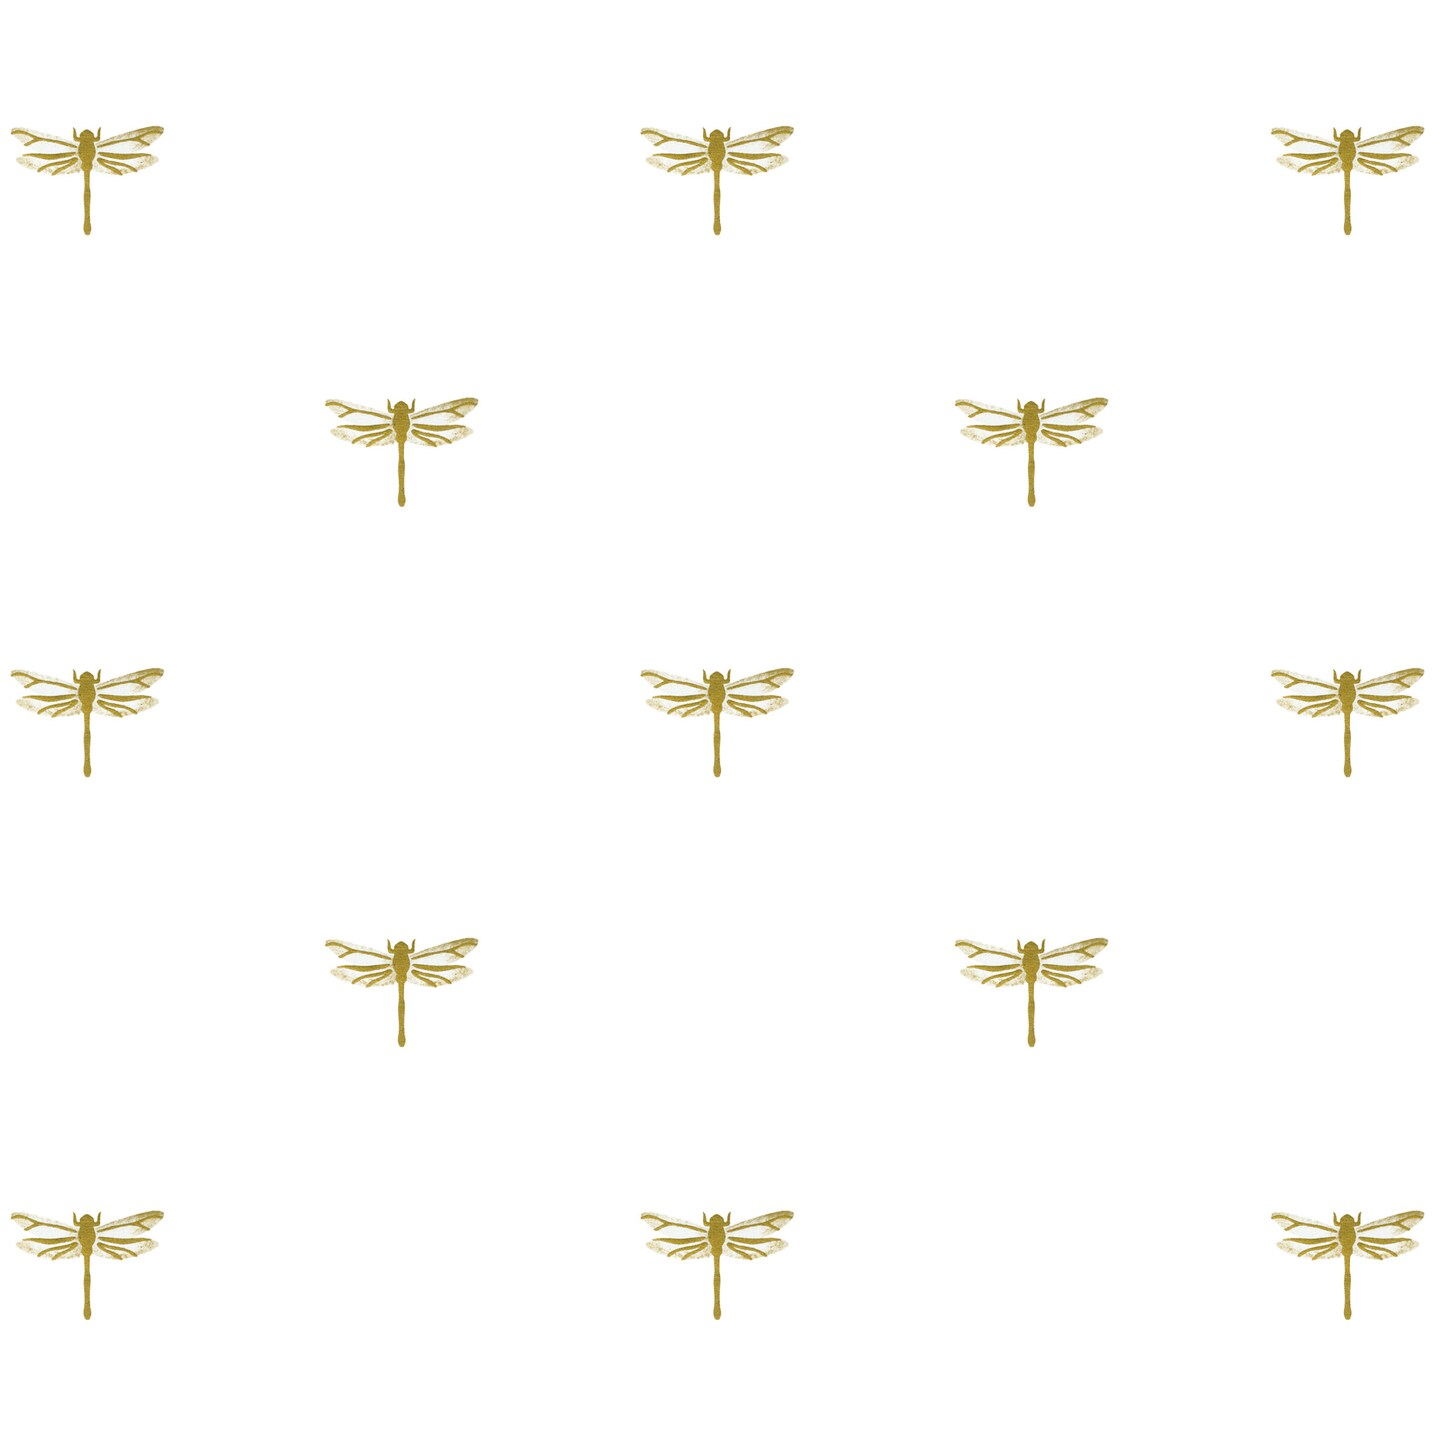 Dragonfly All Over Wall Stencil | 3315 by Designer Stencils | Pattern Stencils | Reusable Stencils for Painting | Safe &#x26; Reusable Template for Wall Decor | Try This Stencil Instead of a Wallpaper | Easy to Use &#x26; Clean Art Stencil Pattern